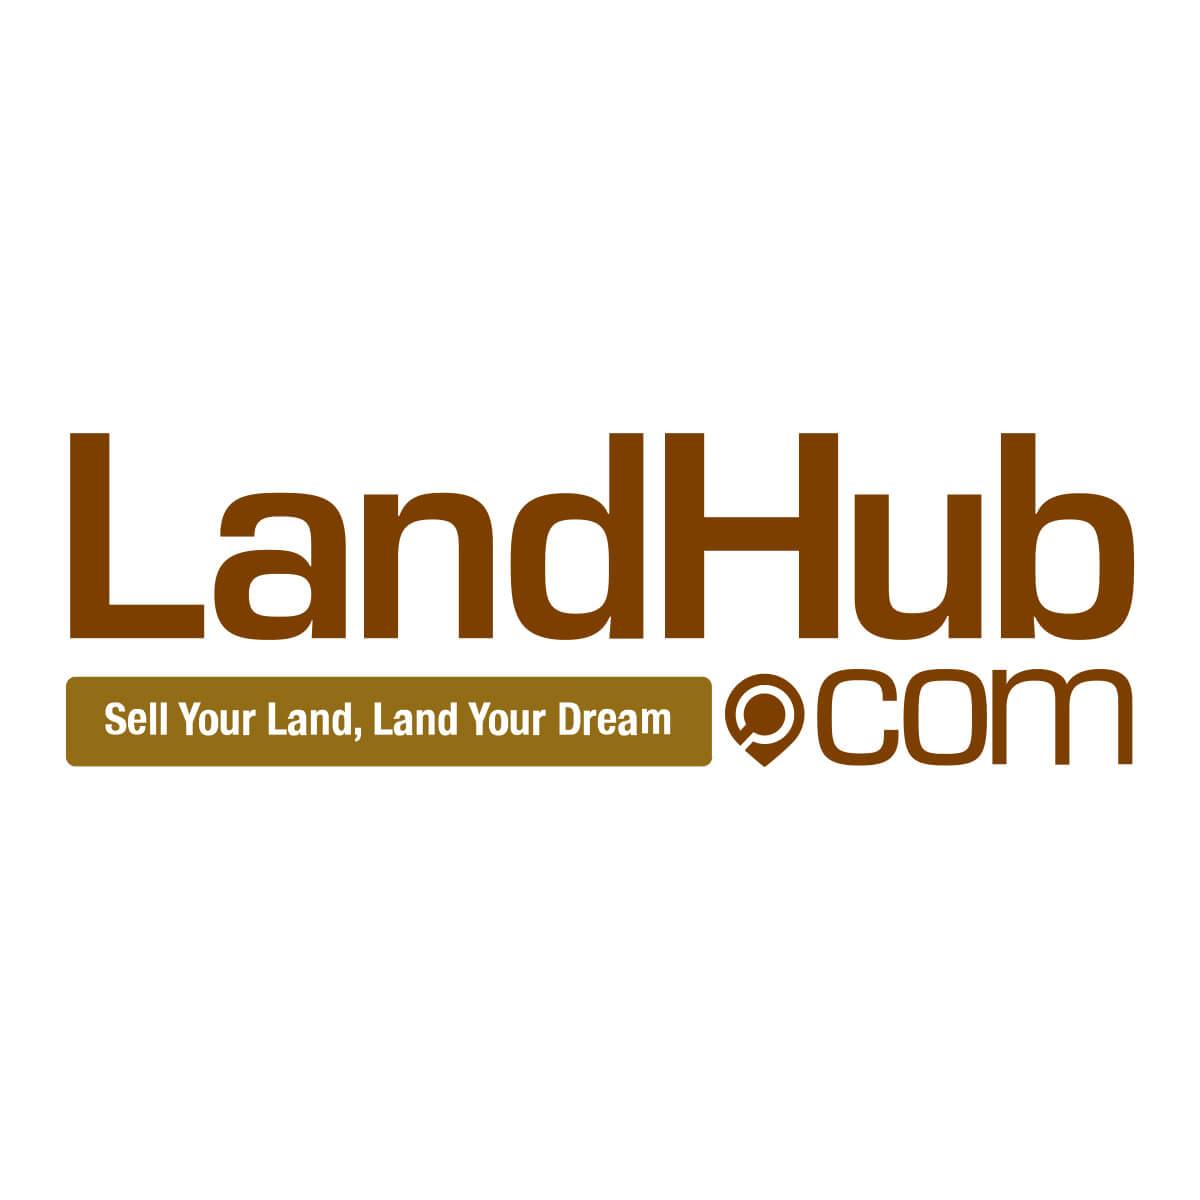 improving your land - uses for vacant land